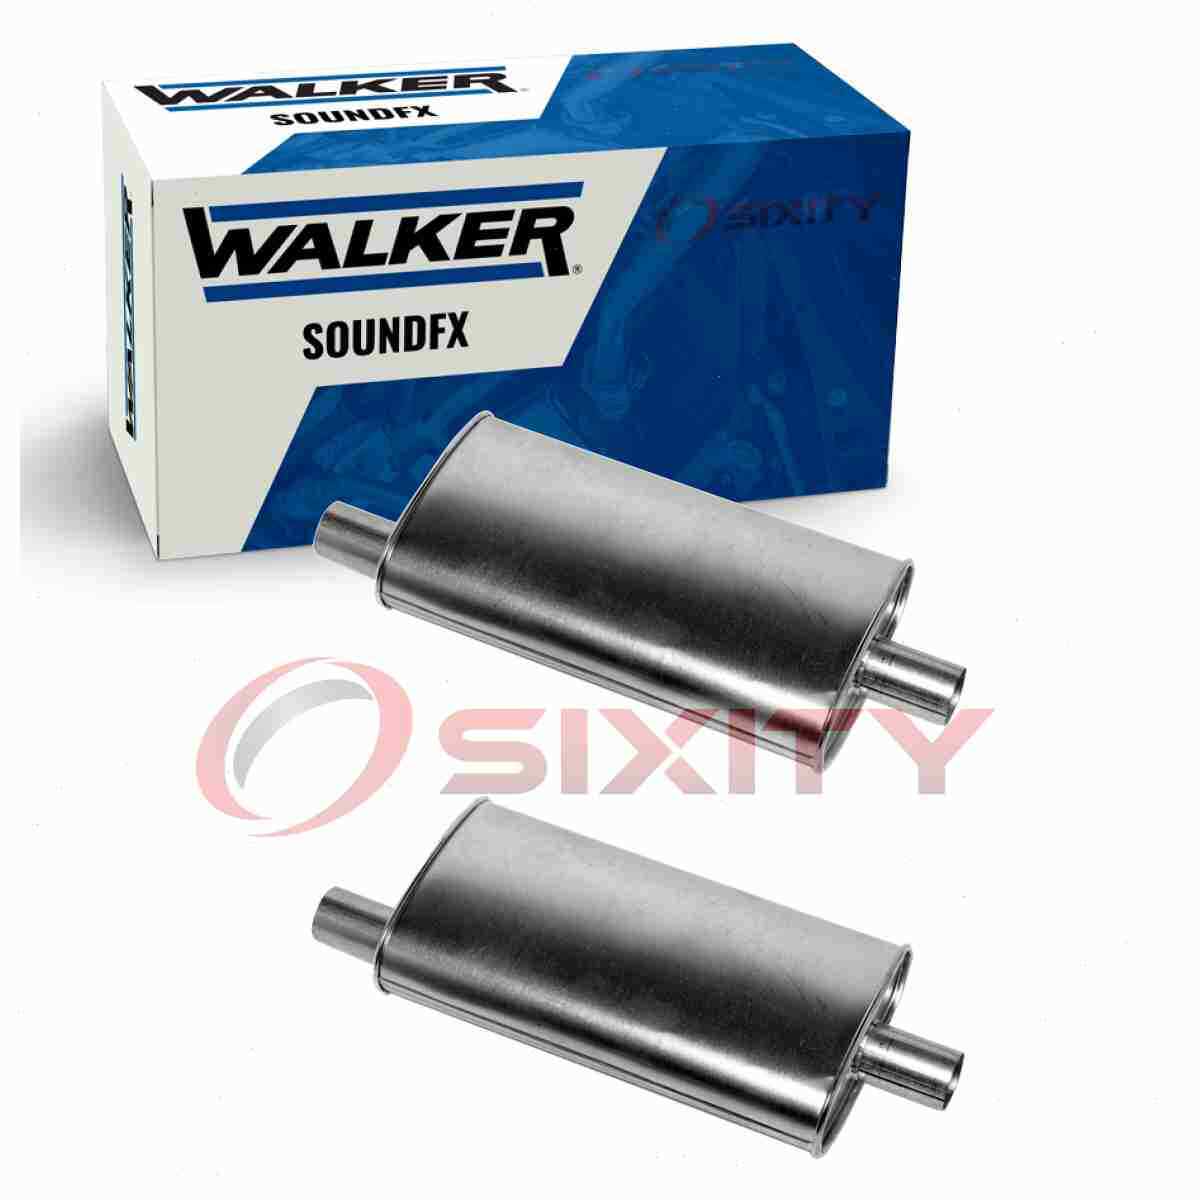 2 pc Walker SoundFX Exhaust Mufflers for 1969-1971 Mercury Cyclone 5.8L 6.4L tr